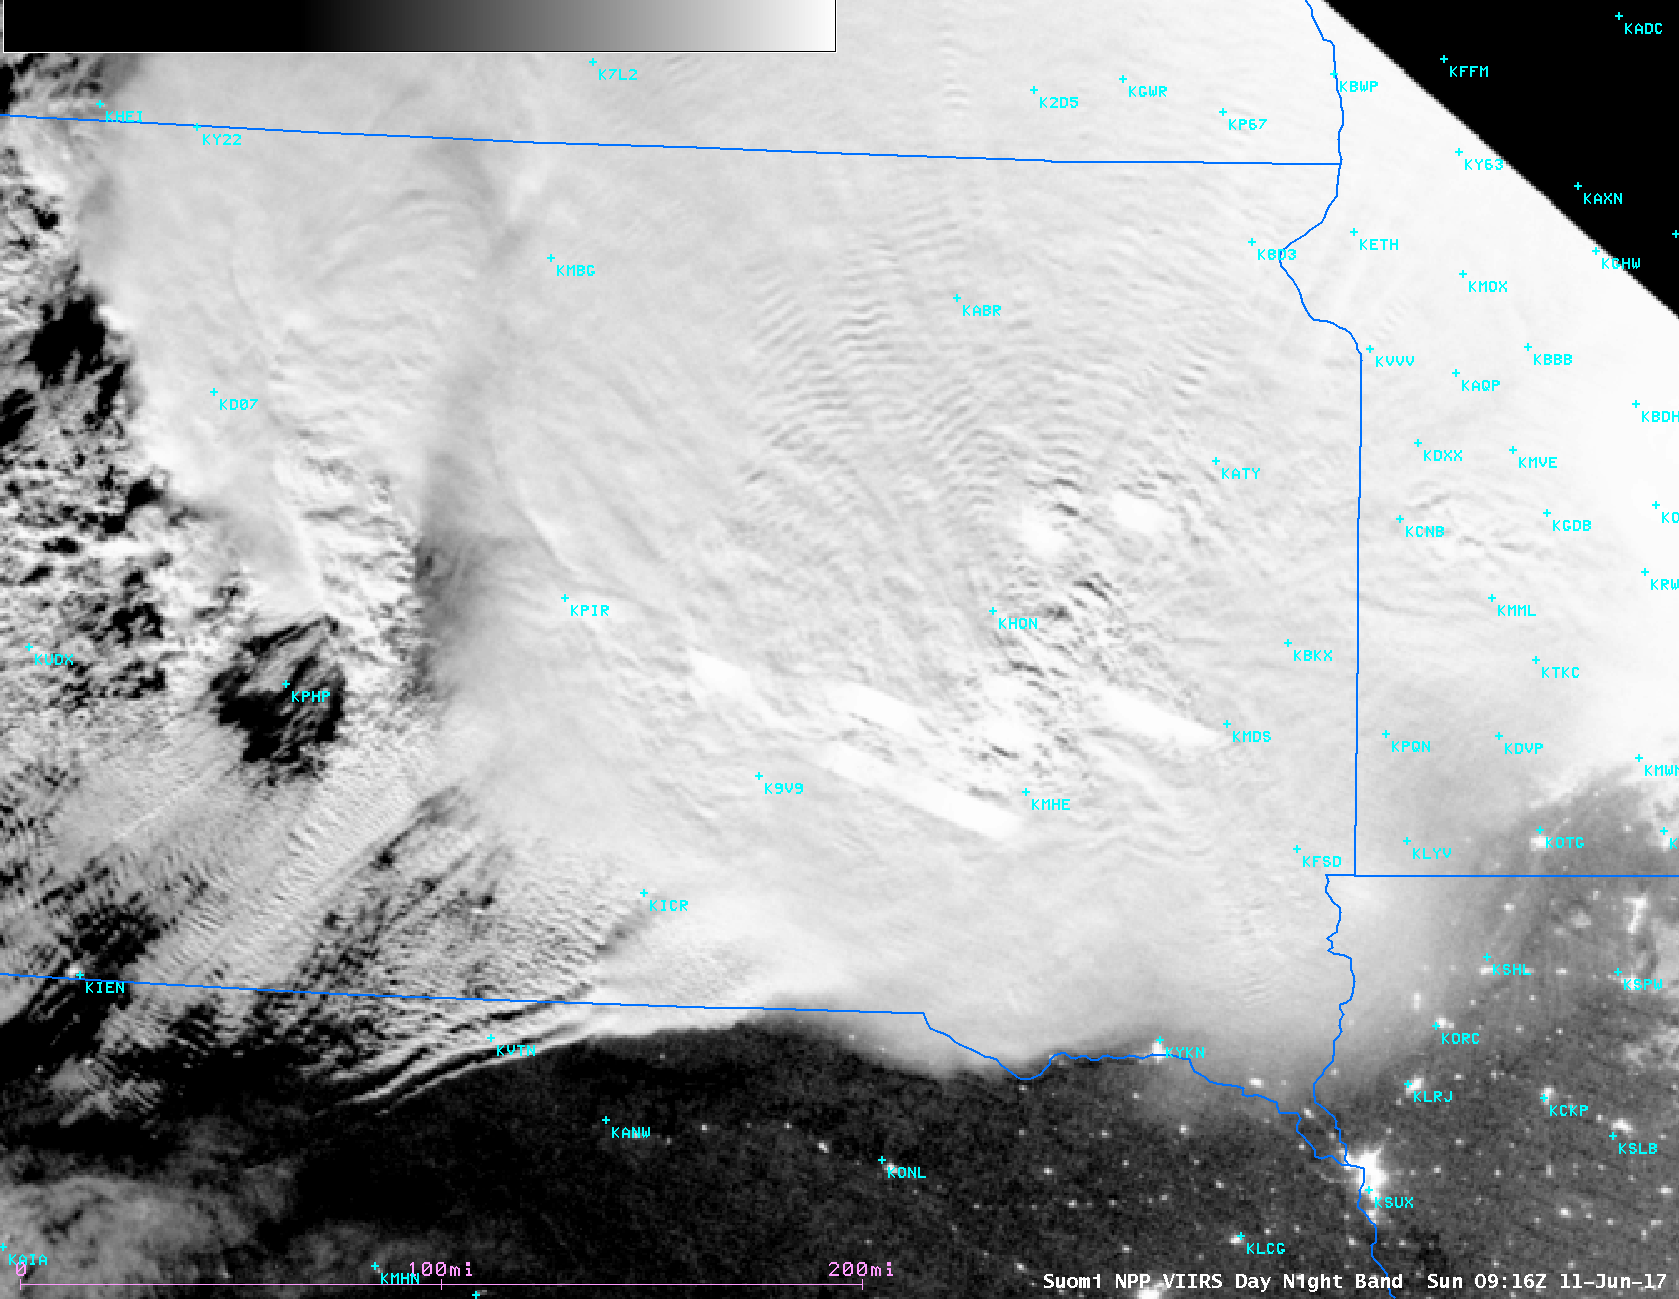 Suomi NPP VIIRS Day/Night Band (0.7 µm) and Infrared Window (11.45 µm) images, with SPC storm reports of hail and wind damage [click to enlarge]